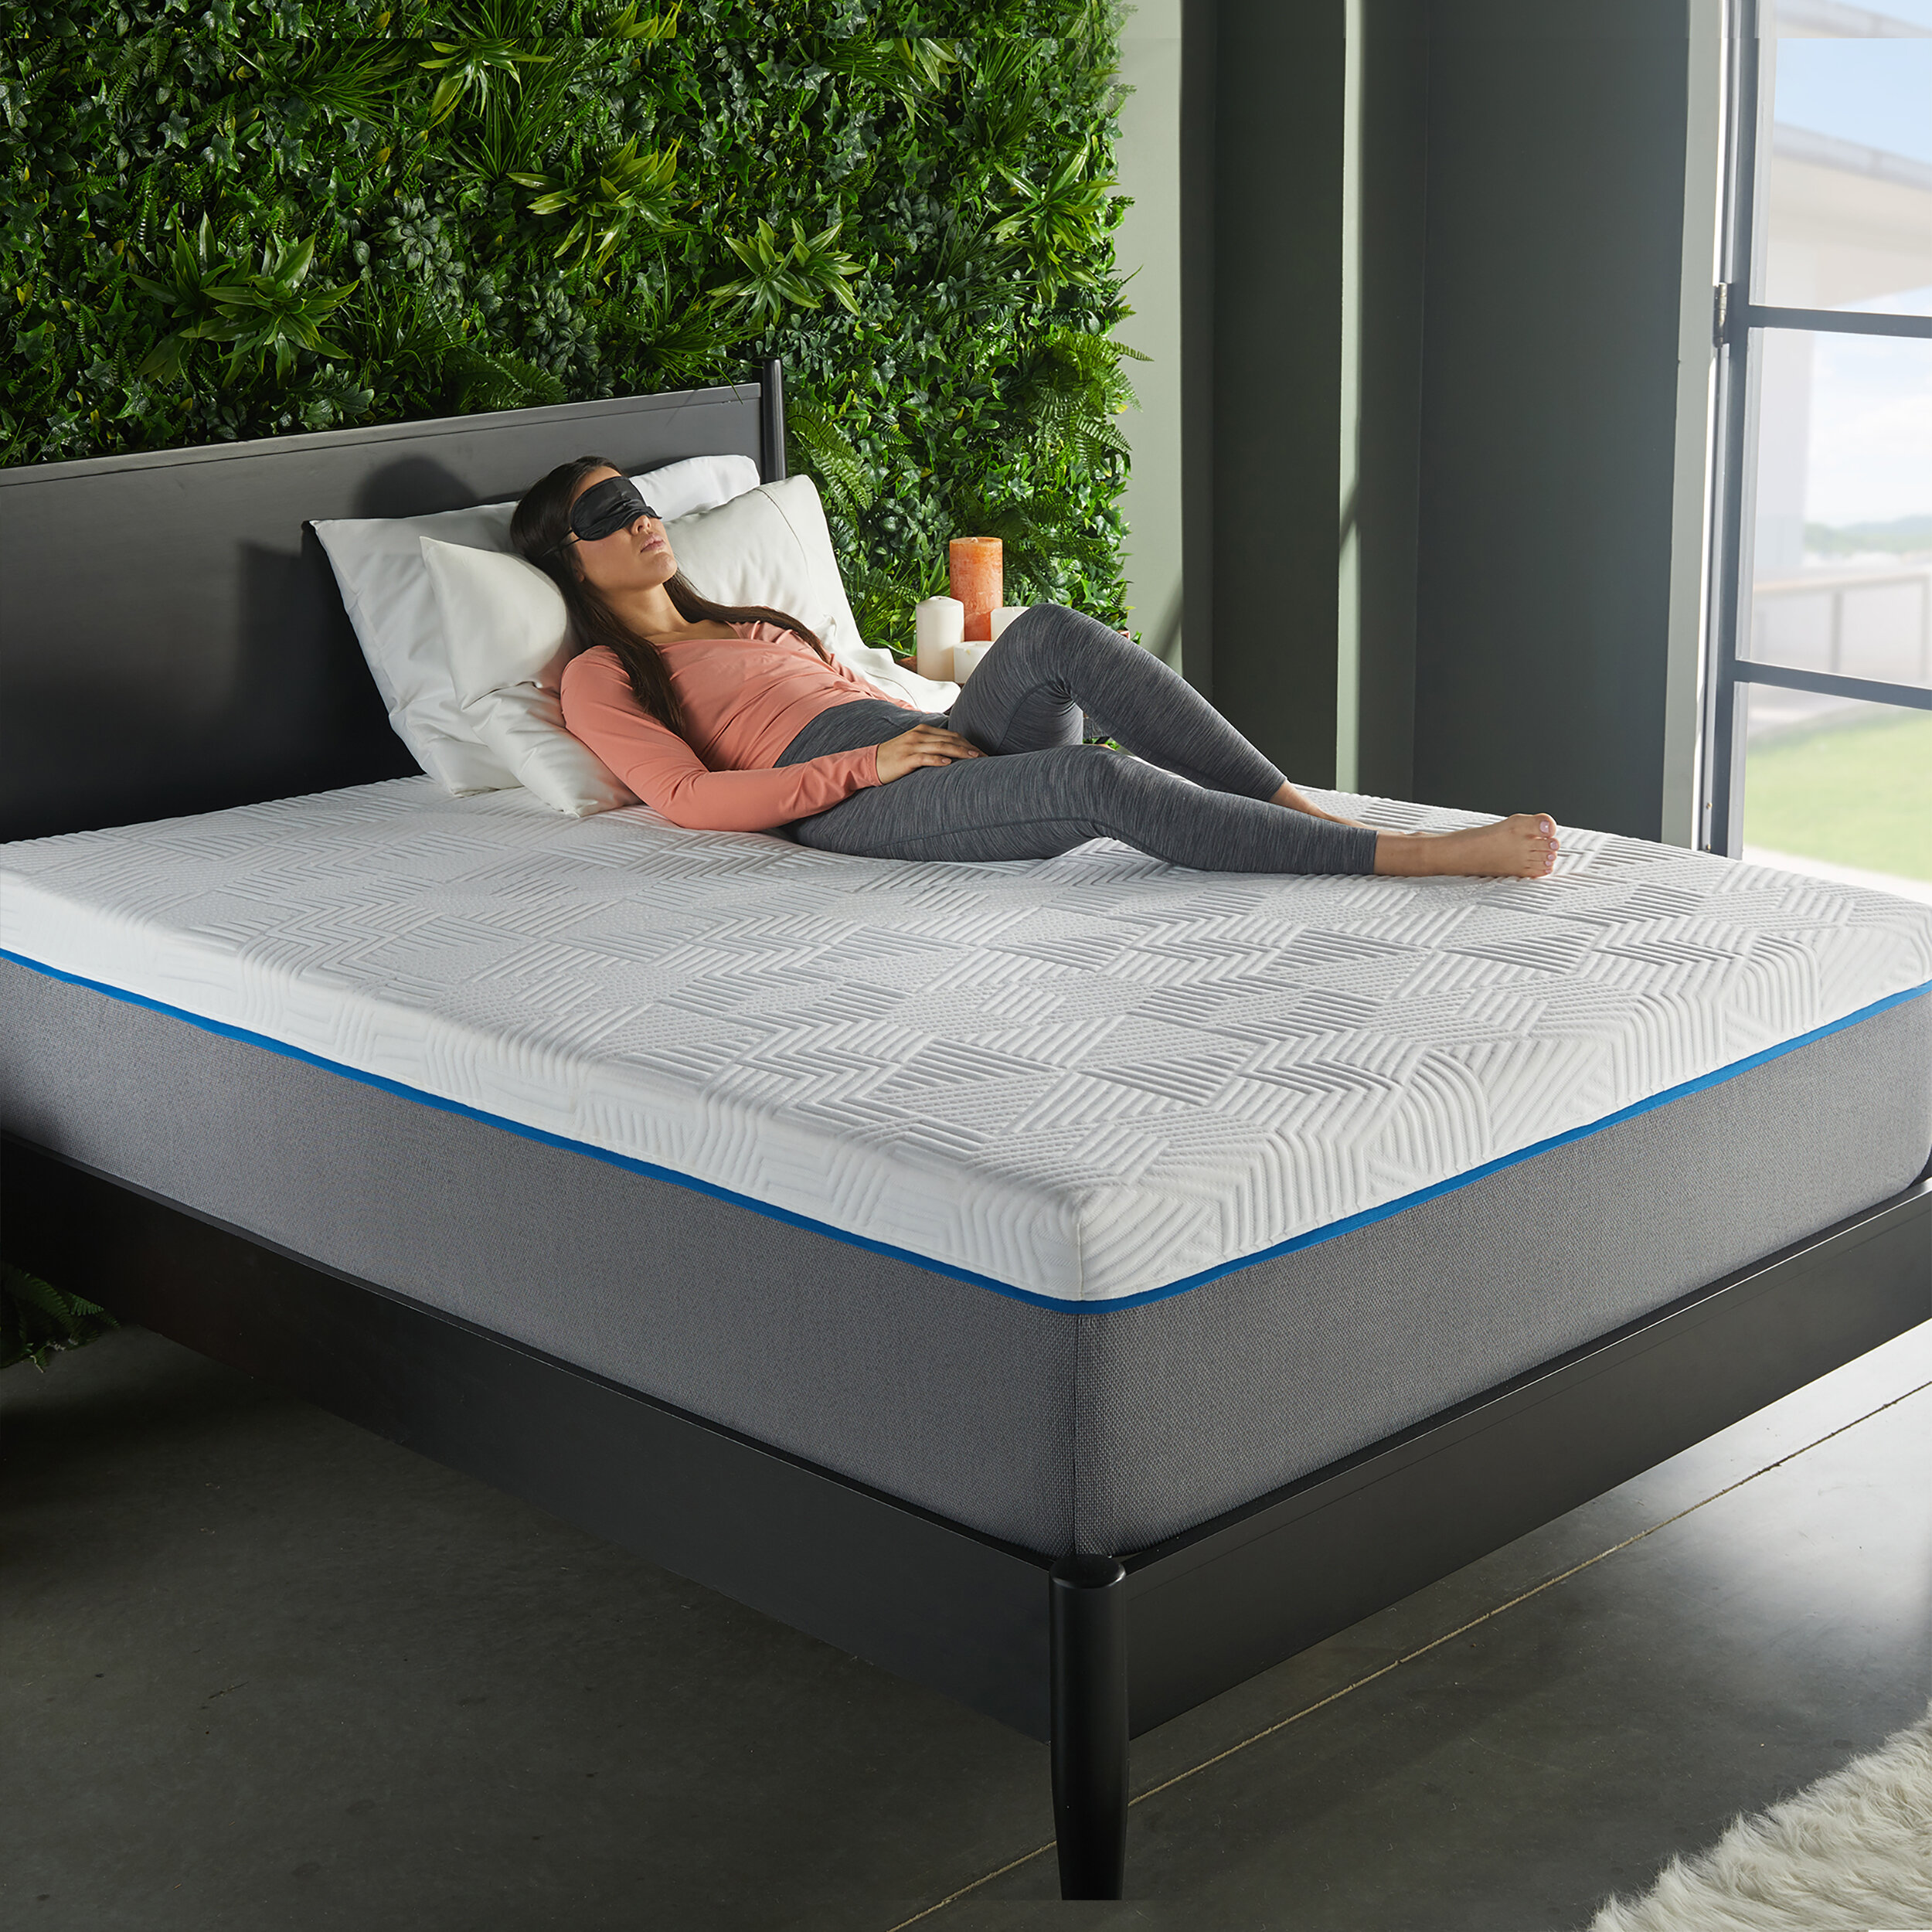 10 Inch Queen Size Memory Foam Mattress With More Pressure Relief Bed In A Box